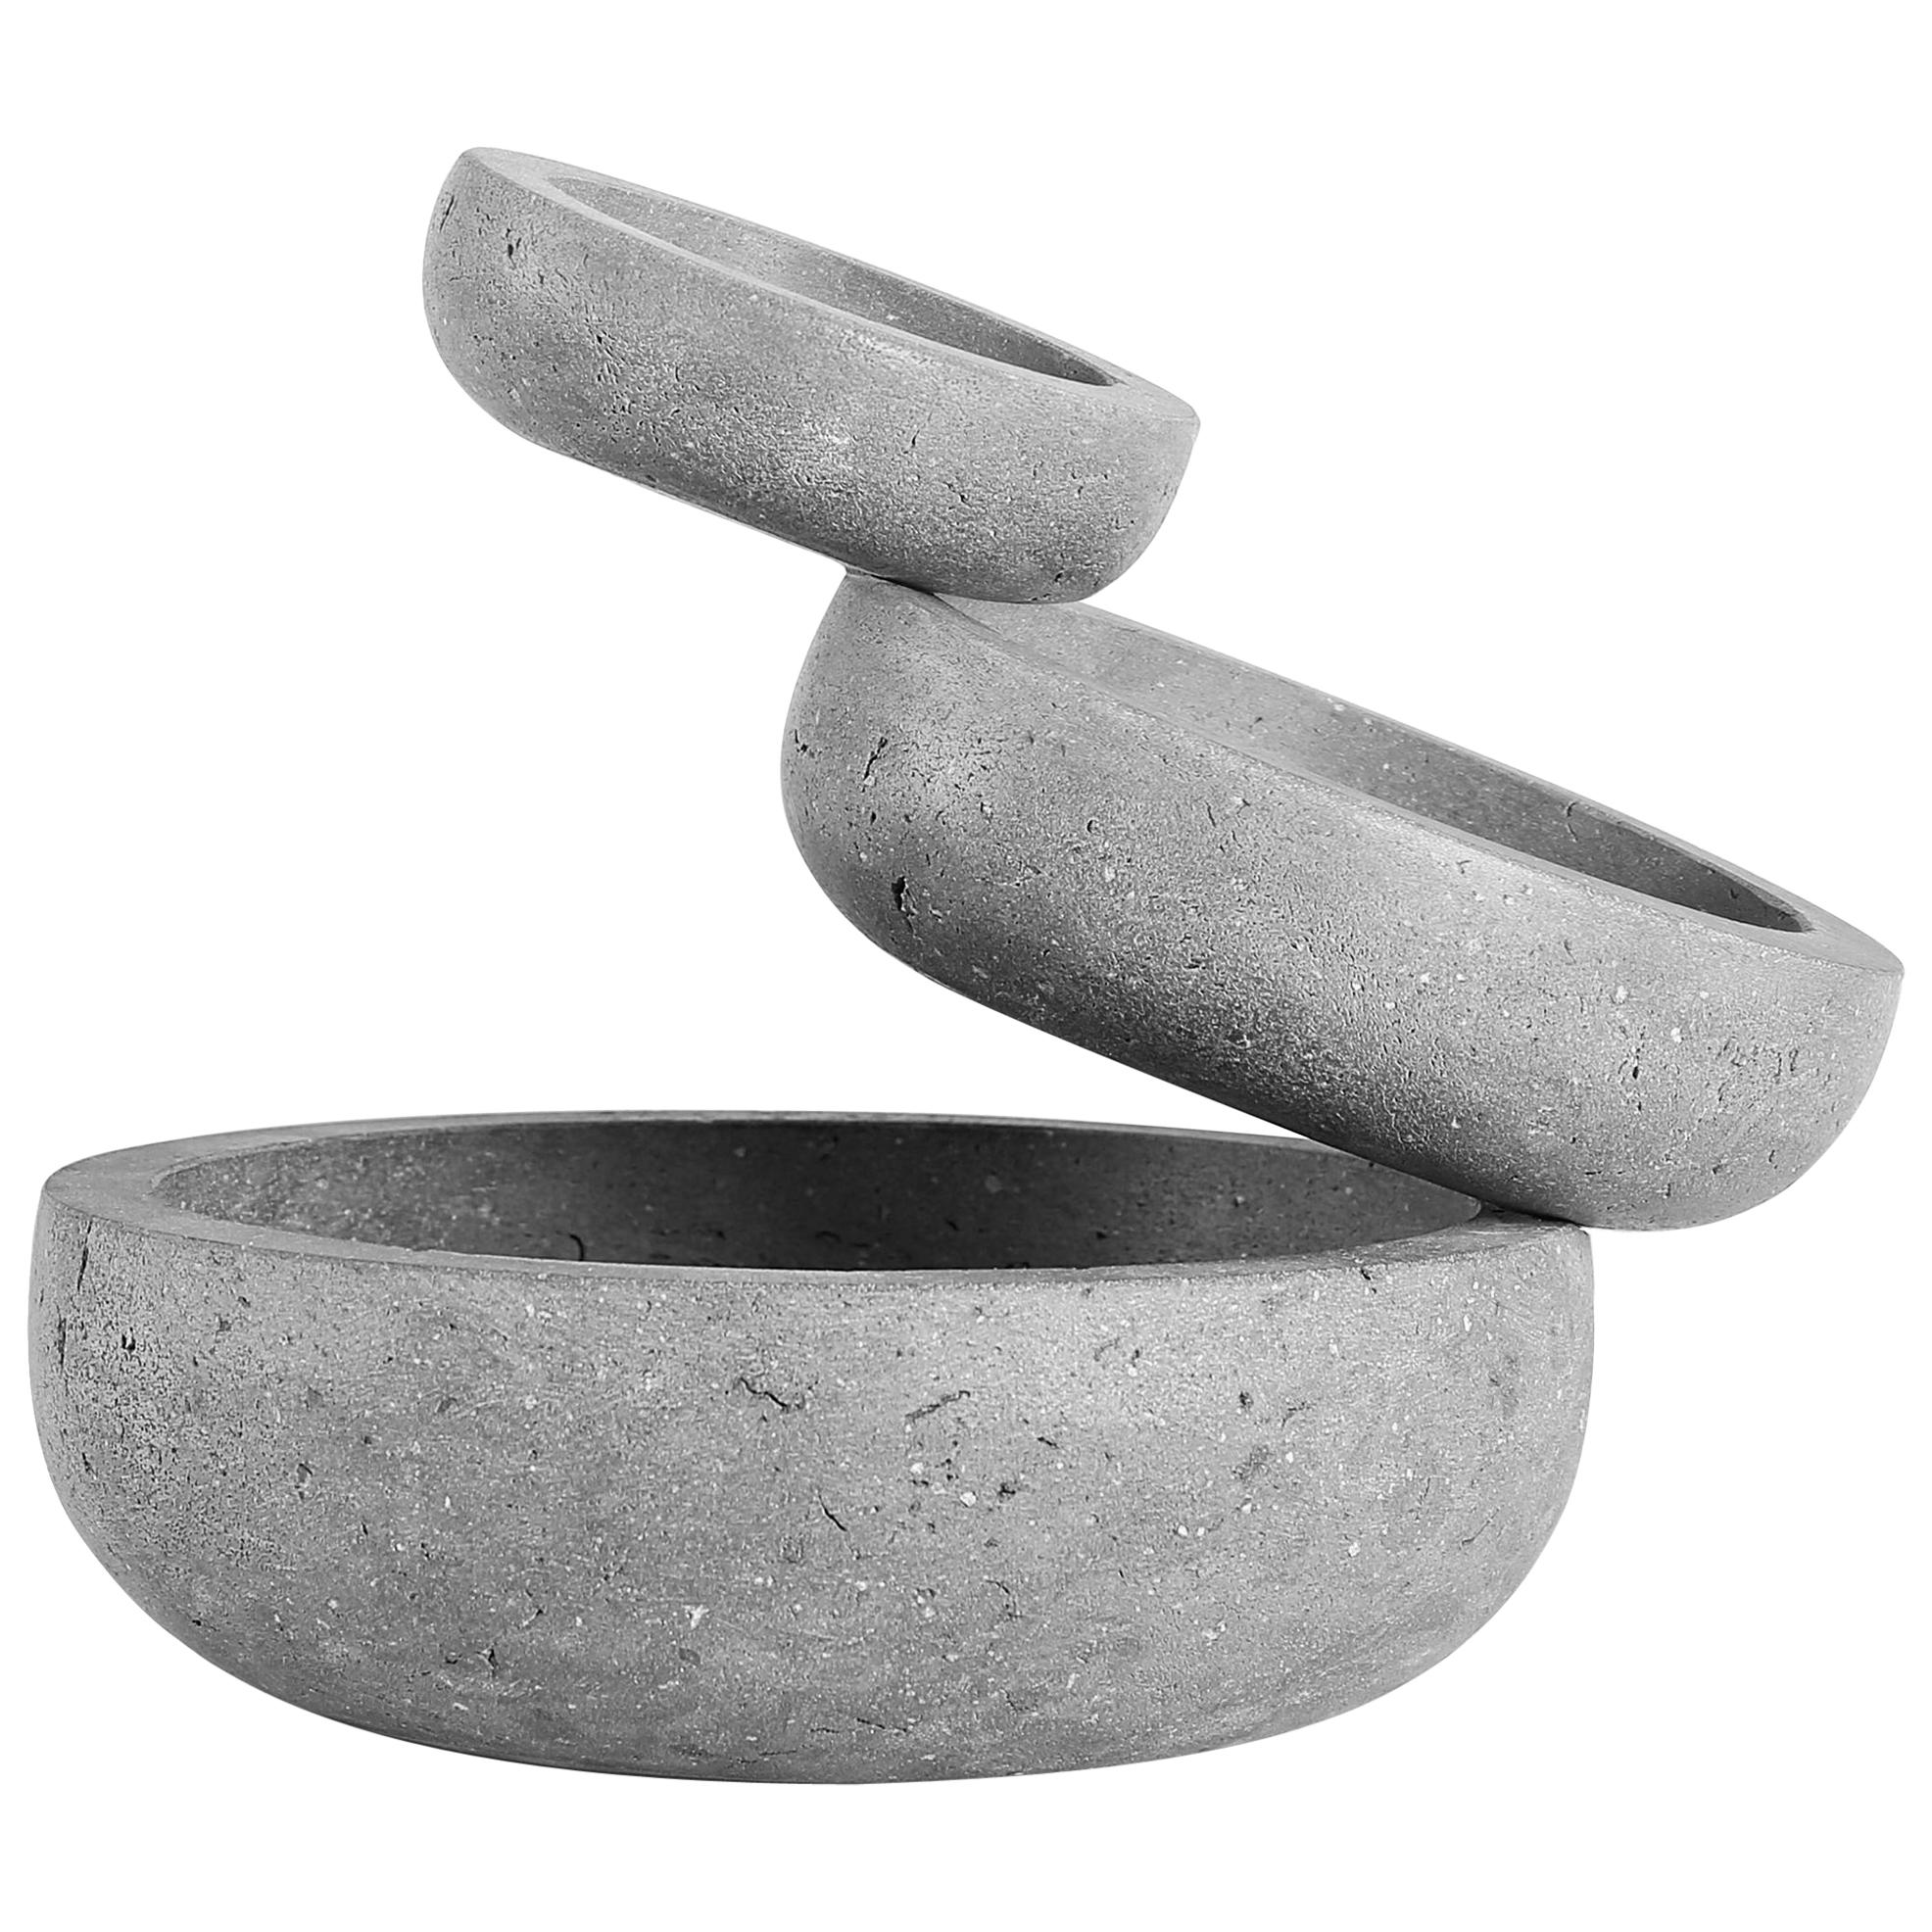 Balancing Stone Sculptural Bowl from the Balance Collection by Joel Escalona